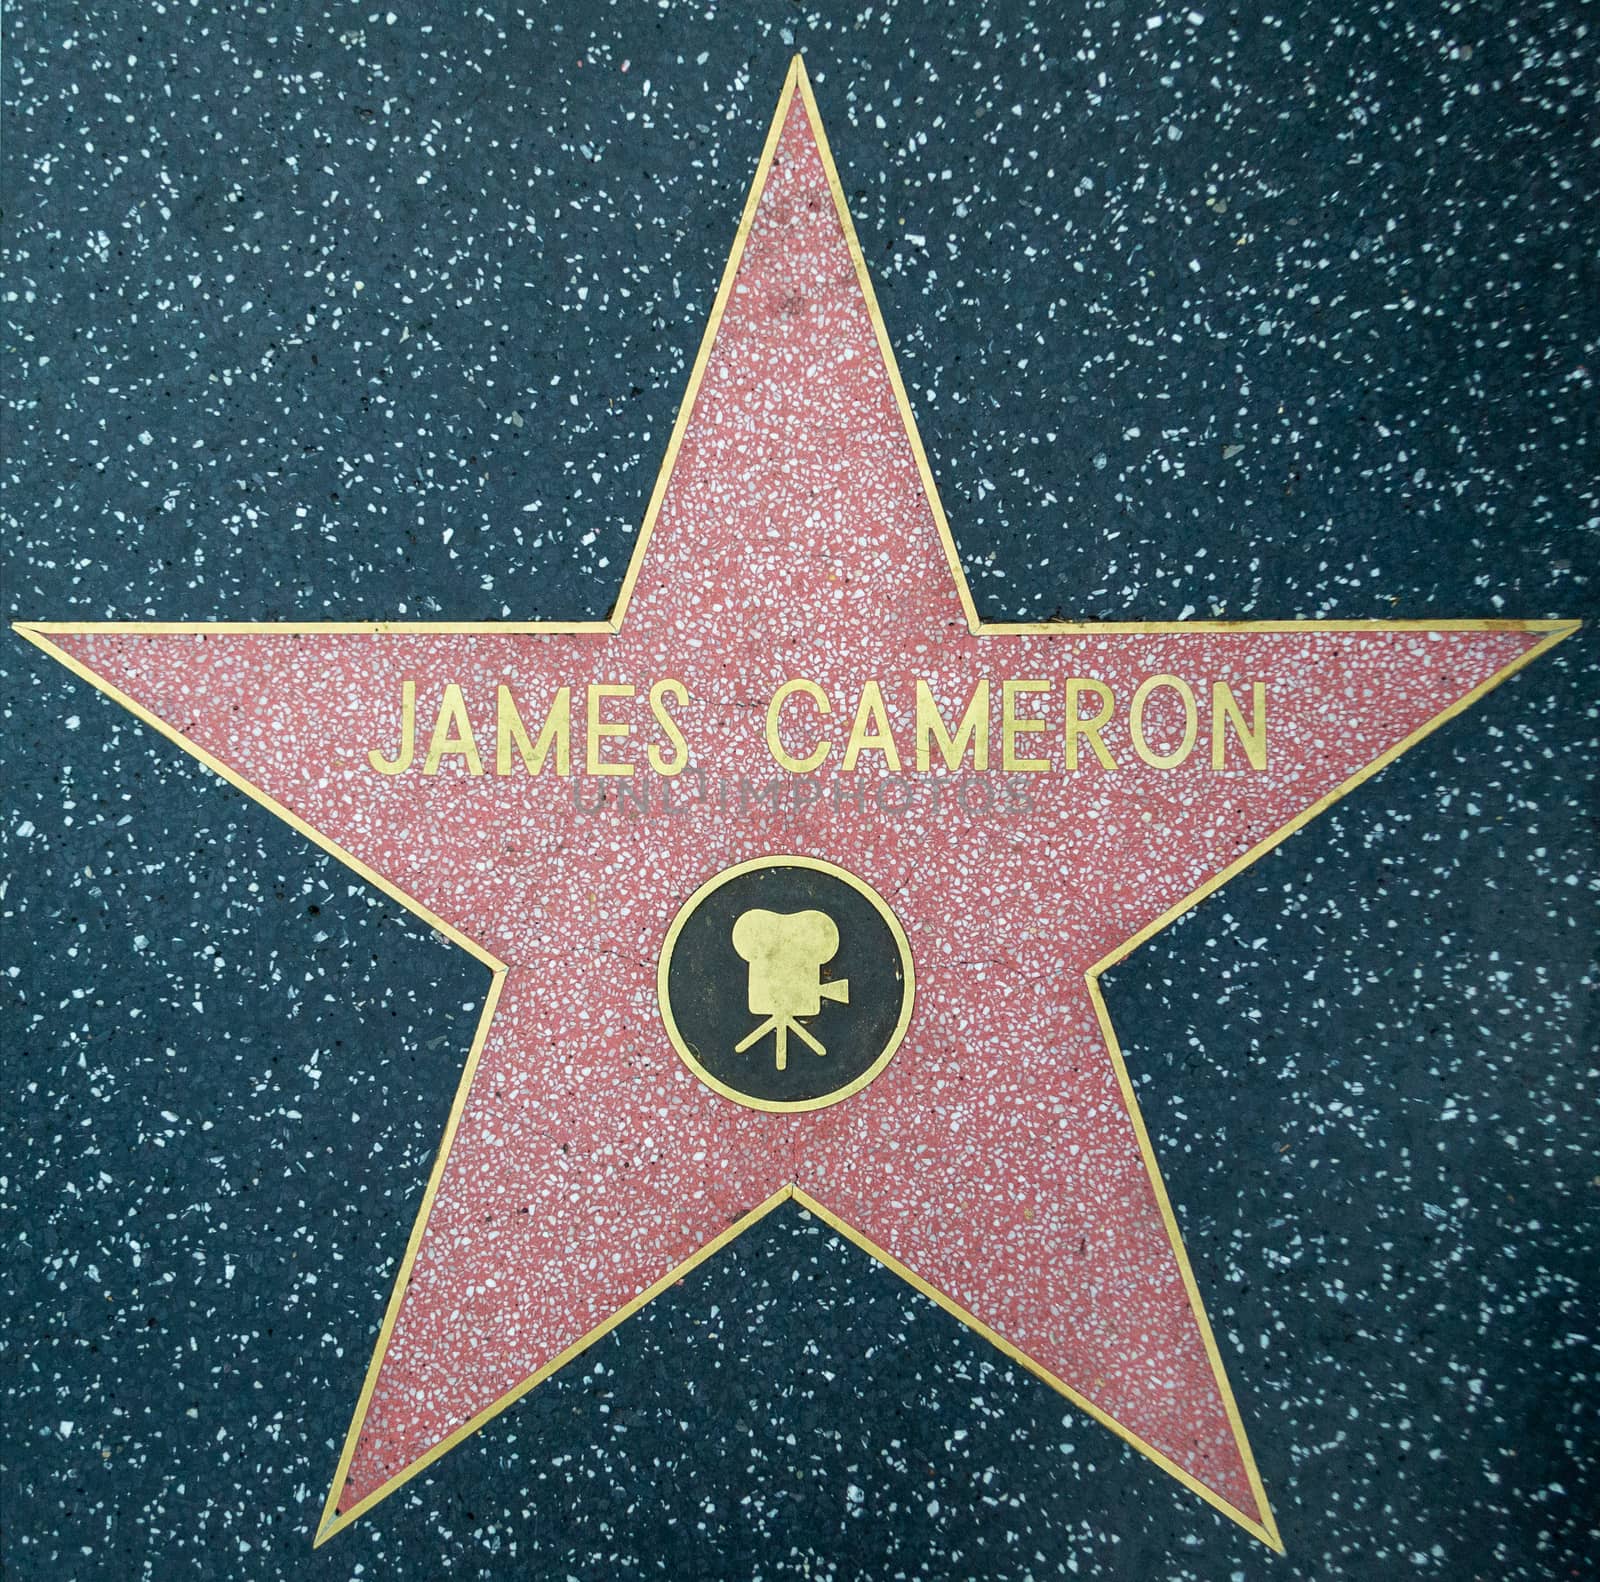 Los Angeles, United States, November 2013: James Cameron star on the walk of fame, hollywood boulevard in Los Angeles, USA.